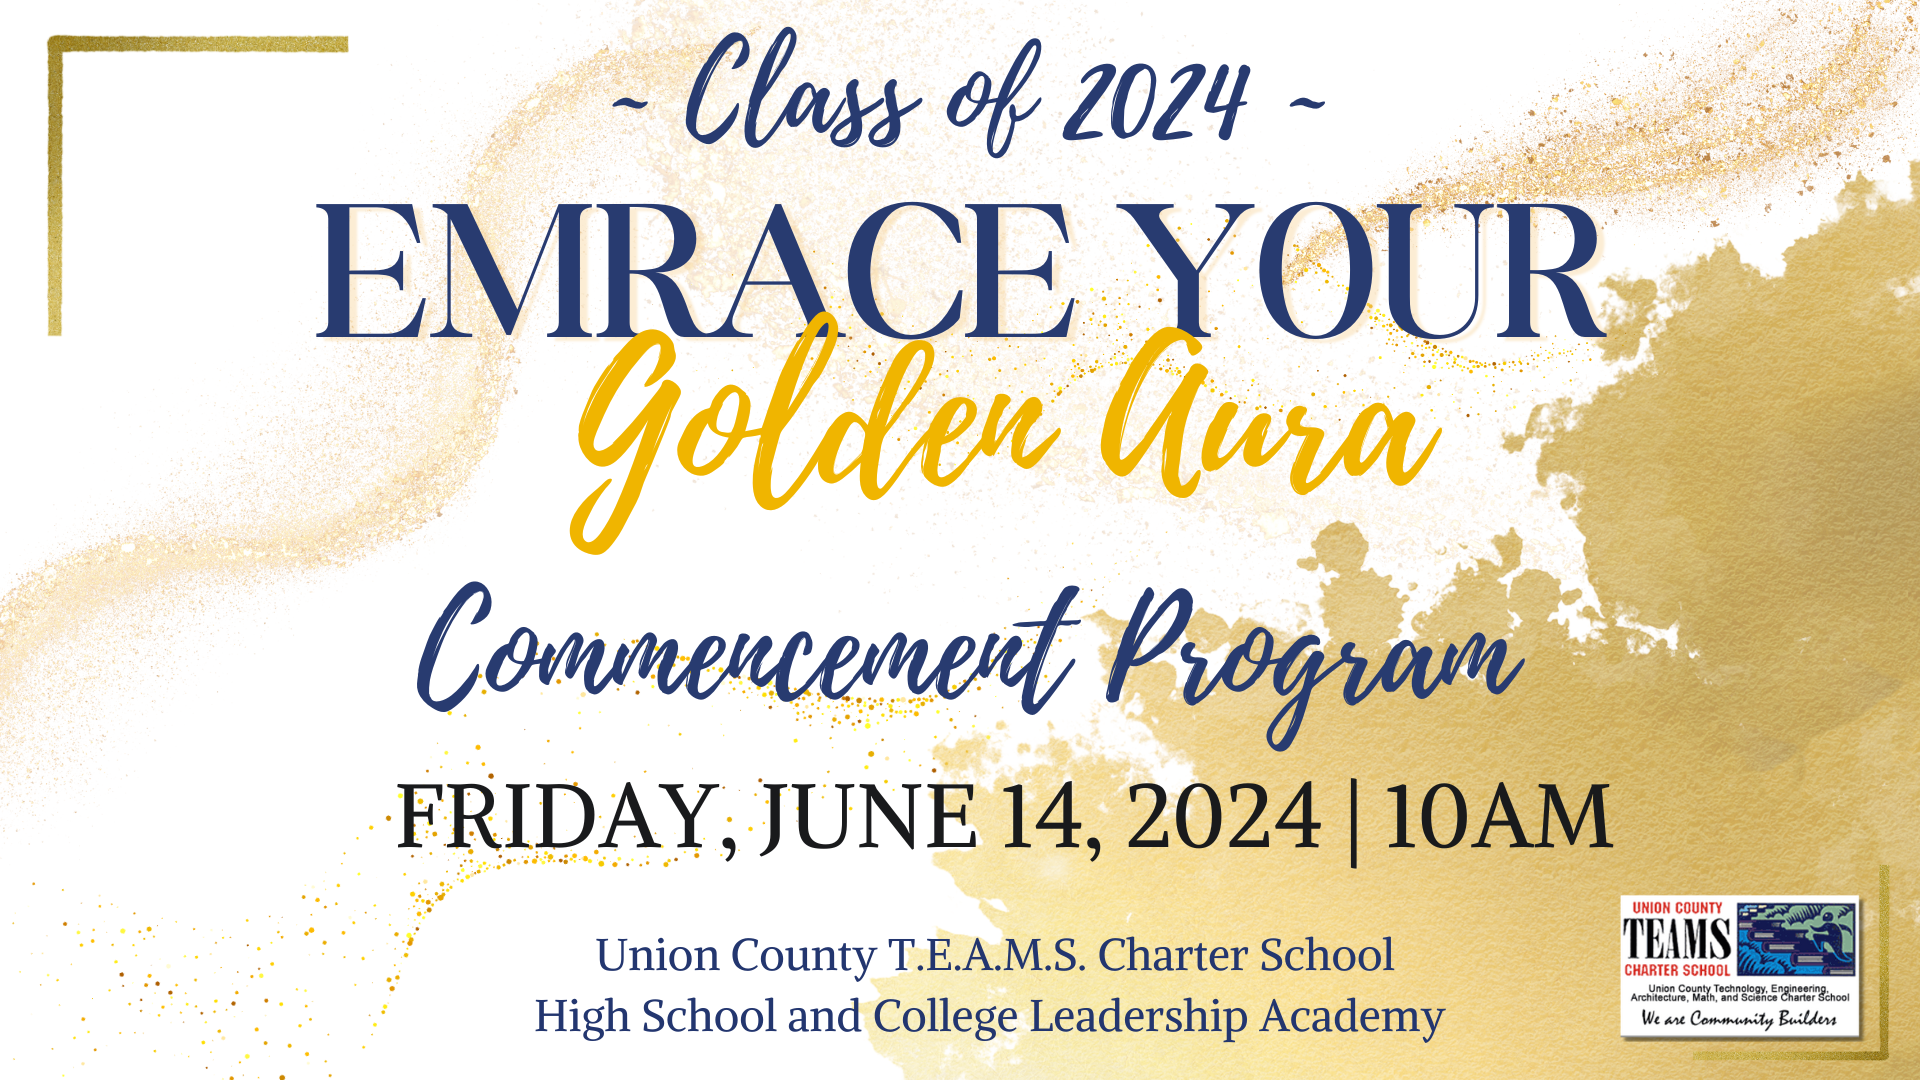 Commencement Program, Friday, June 14th at 10:00am